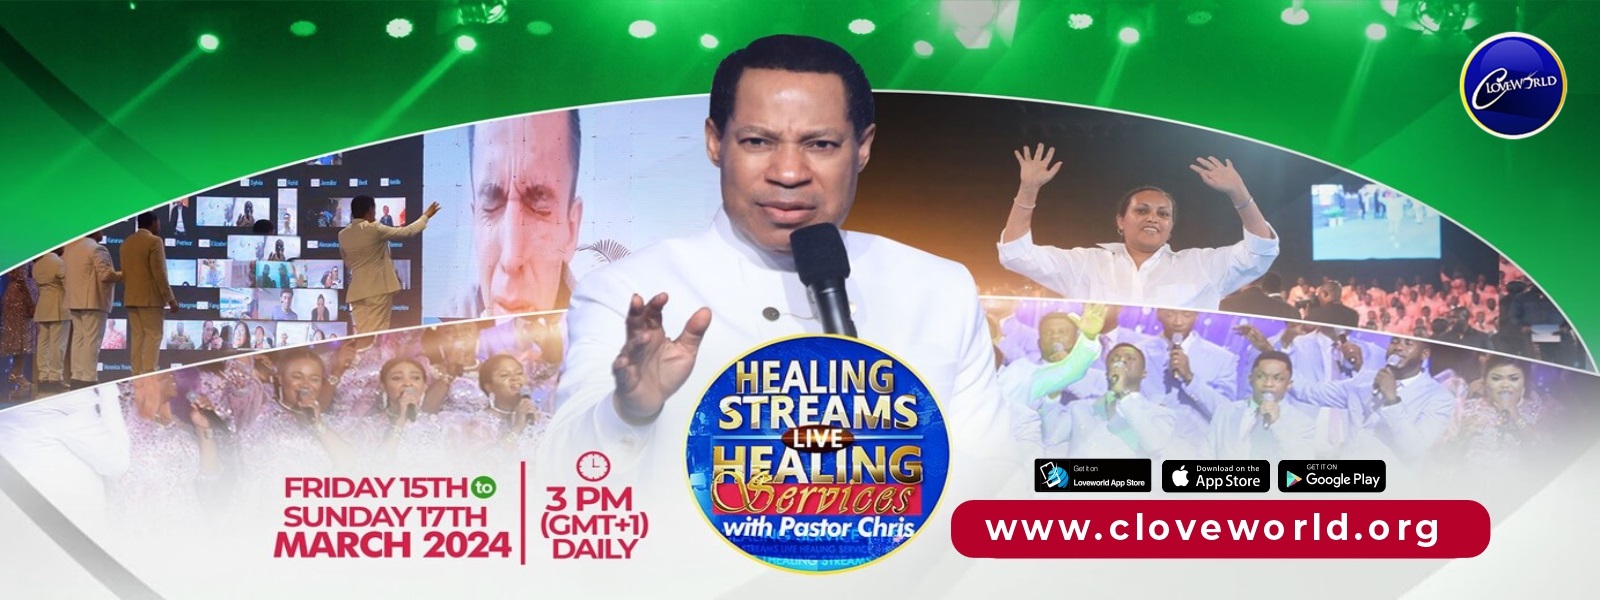 HEALING STREAMS WITH PASTOR CHRIS